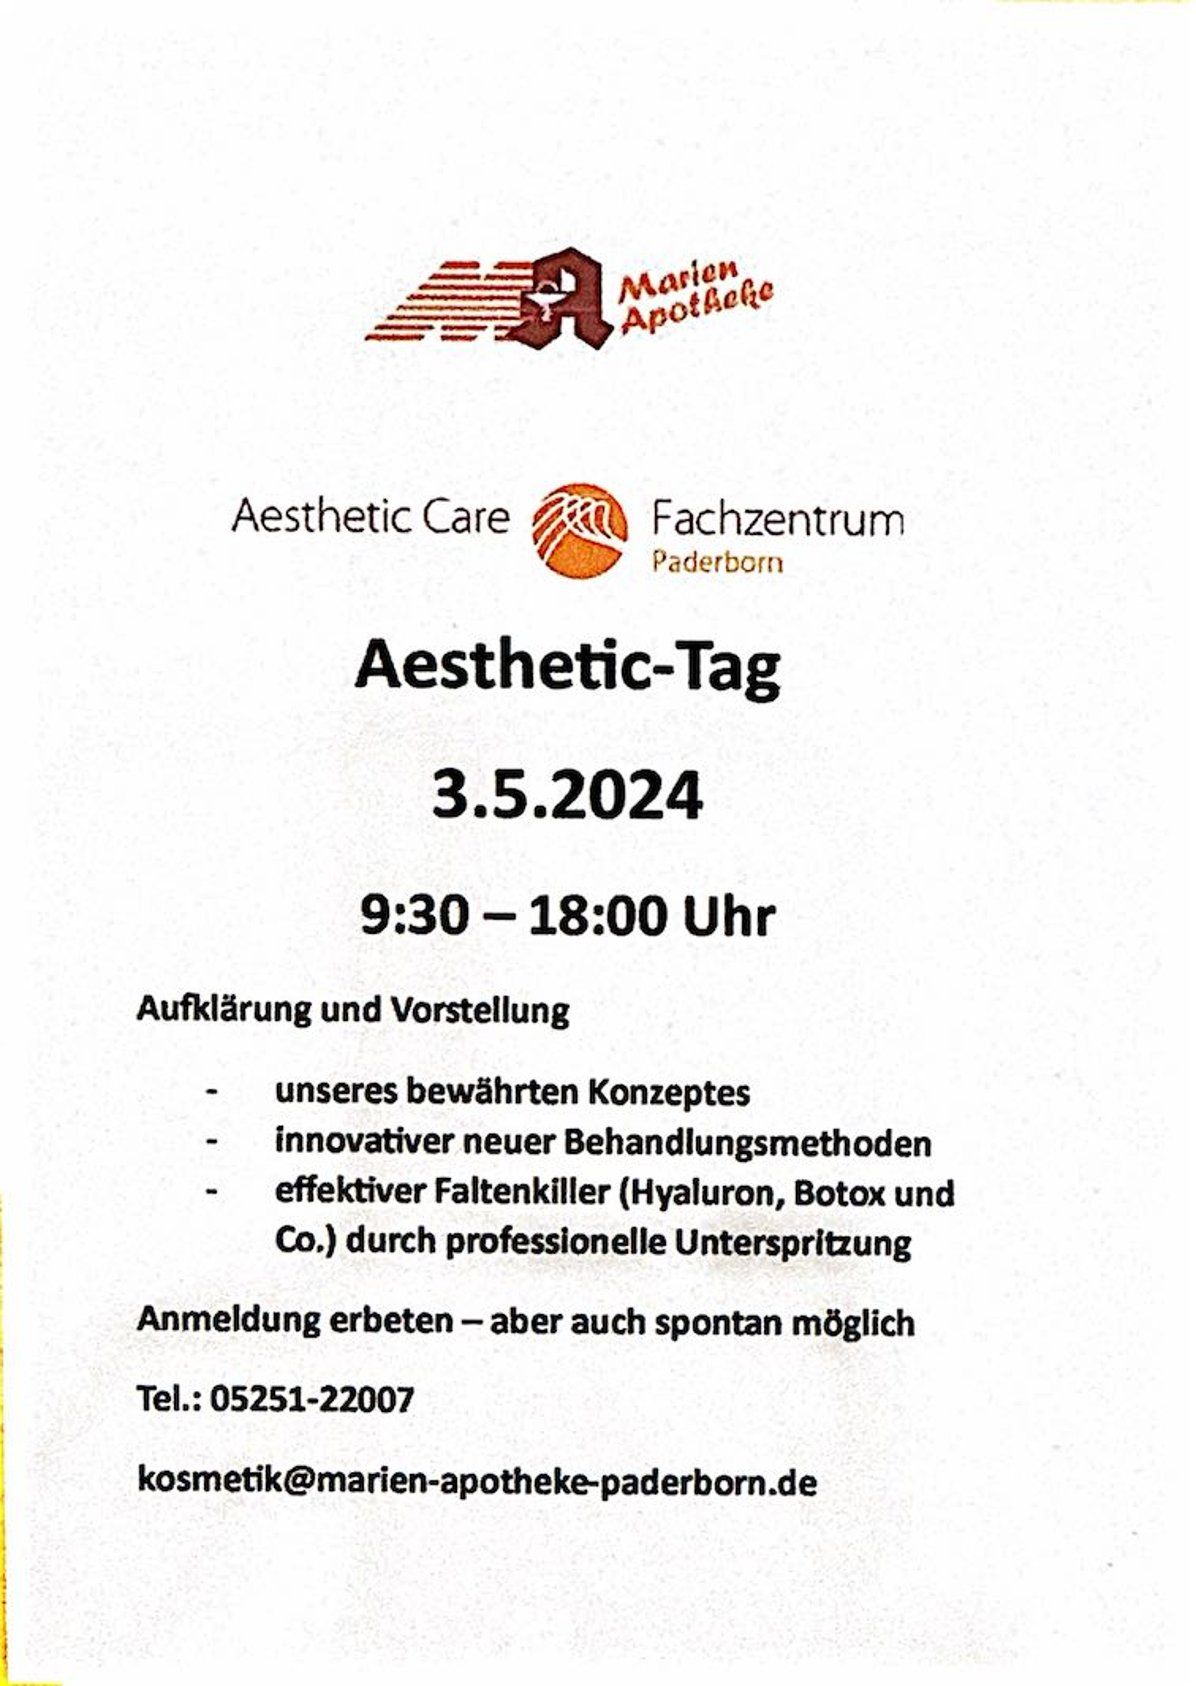 Aesthetic-Tag